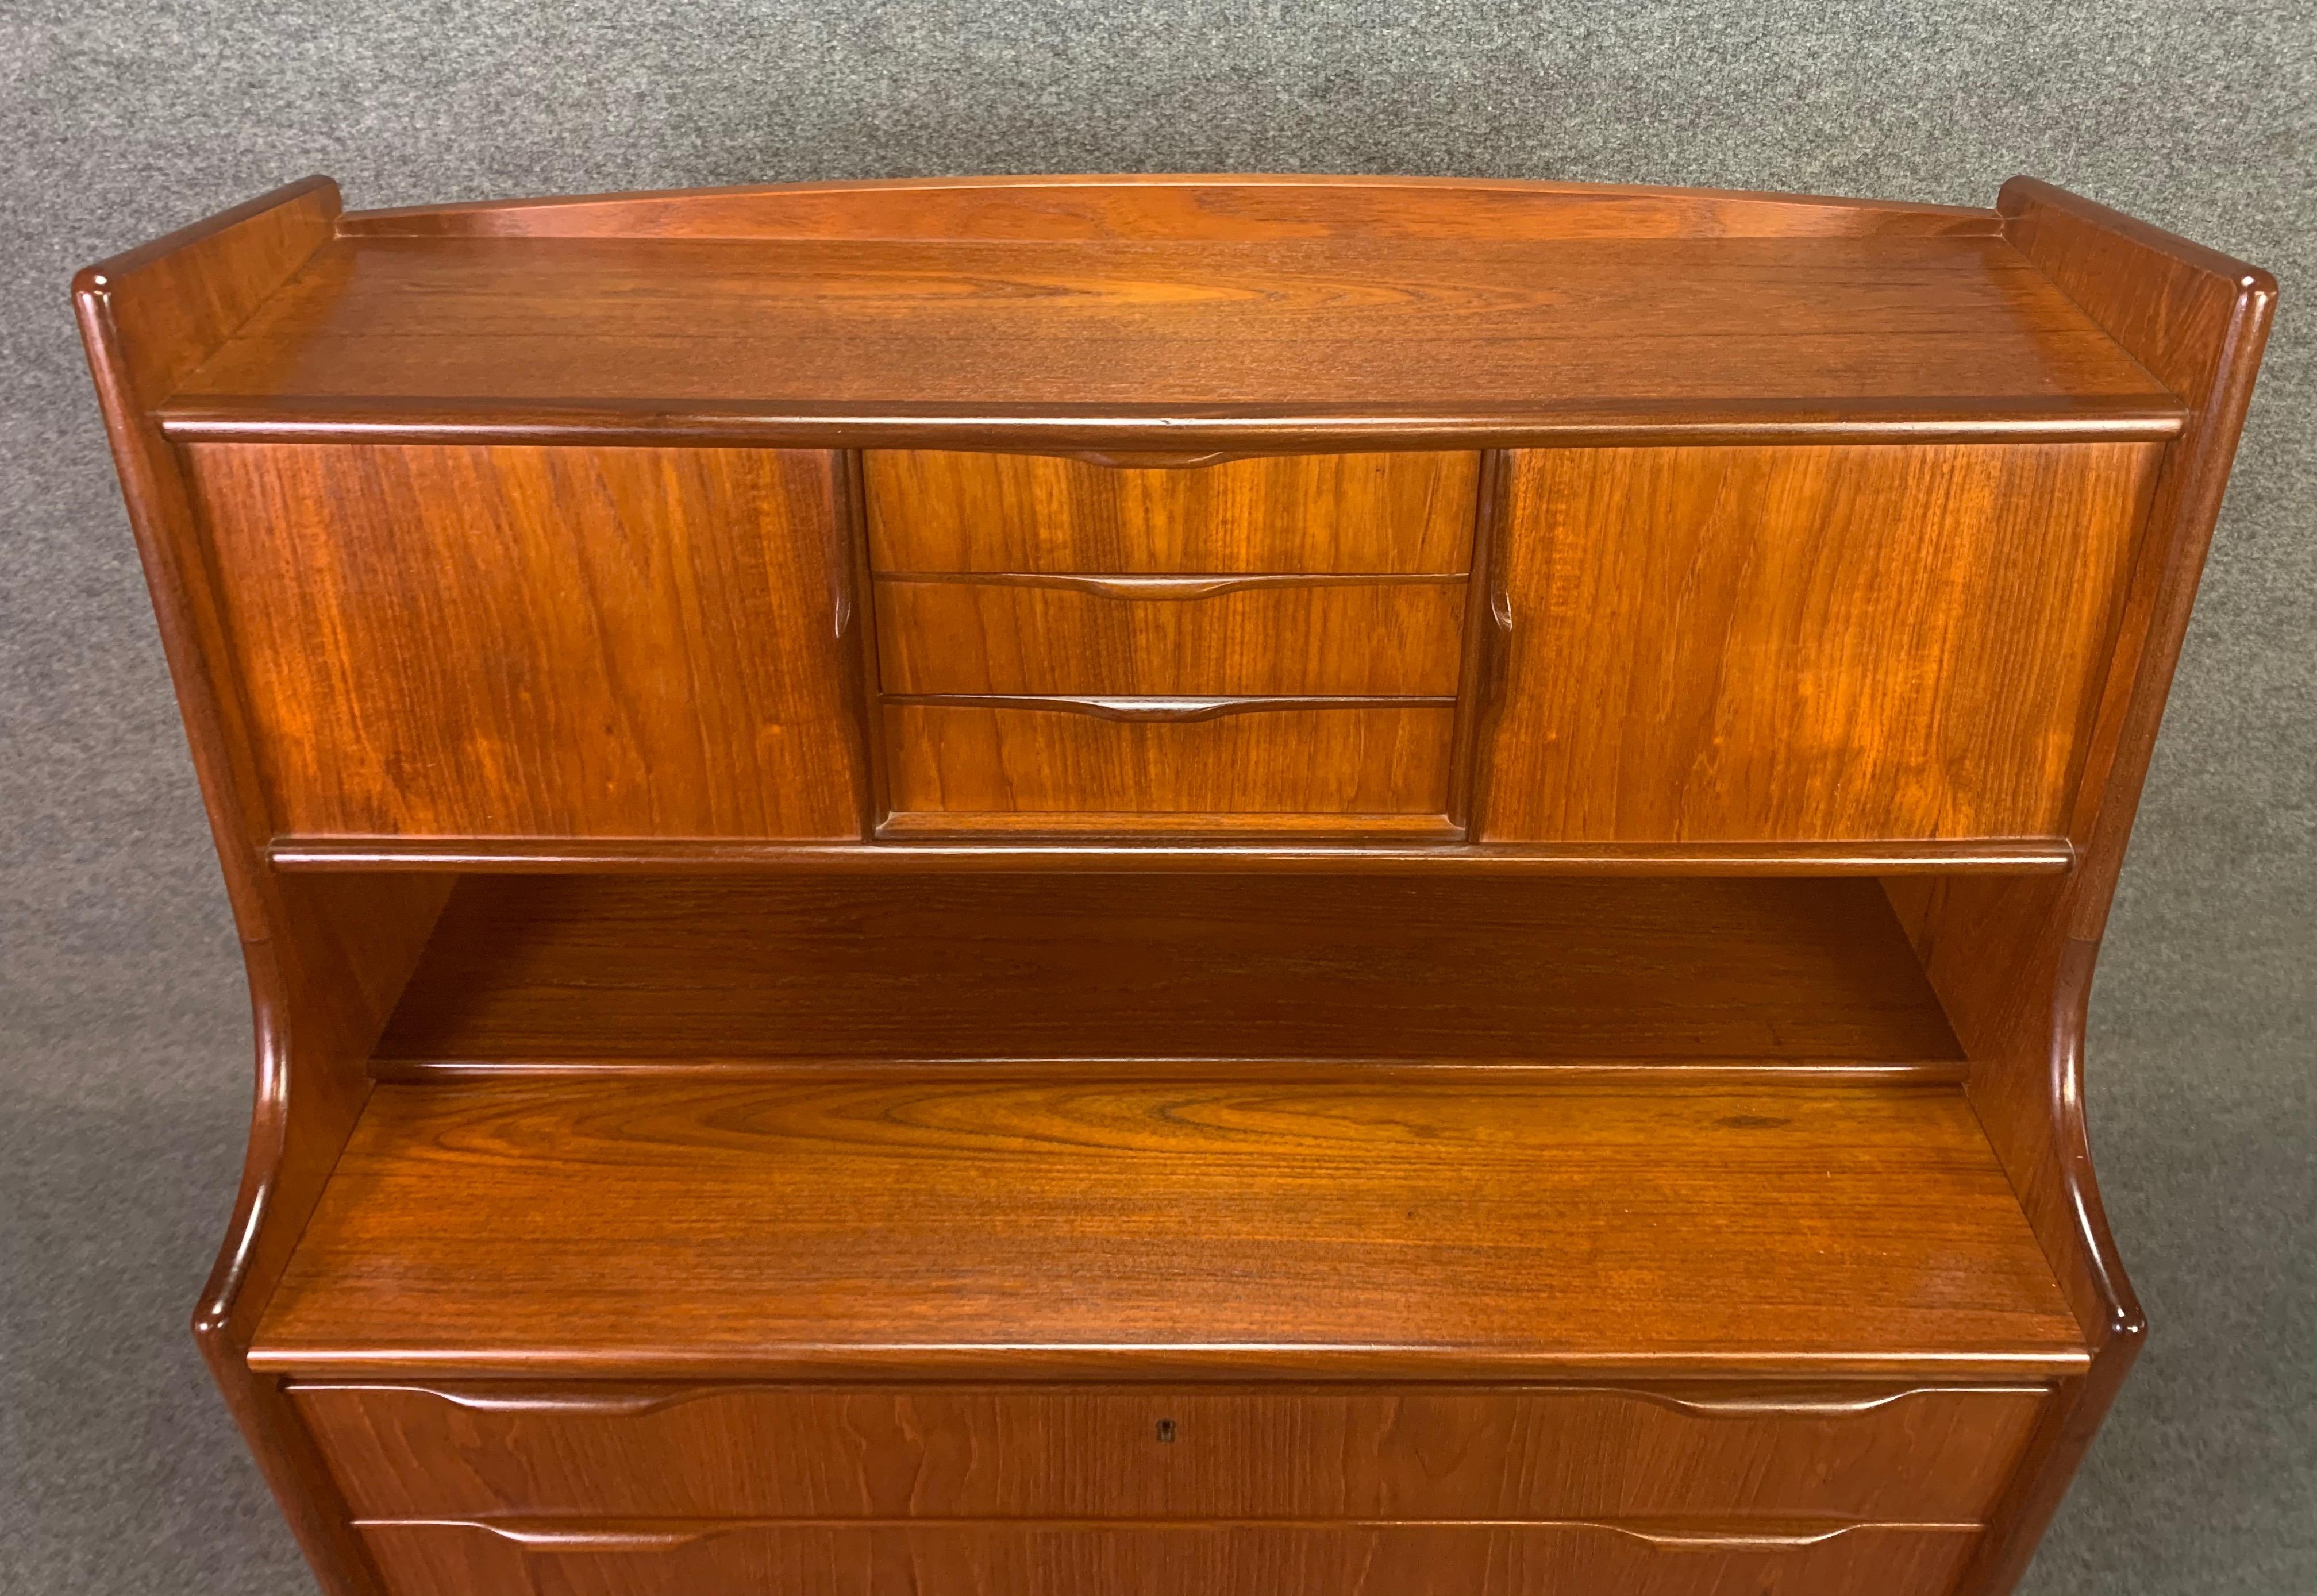 Here is a beautiful 1960s Scandinavian modern teak secretary desk recently imported from Denmark to California after its purchase at Lauritz auction house.
This exquisite case piece features a vibrant wood grain, sculptural lines, many storage